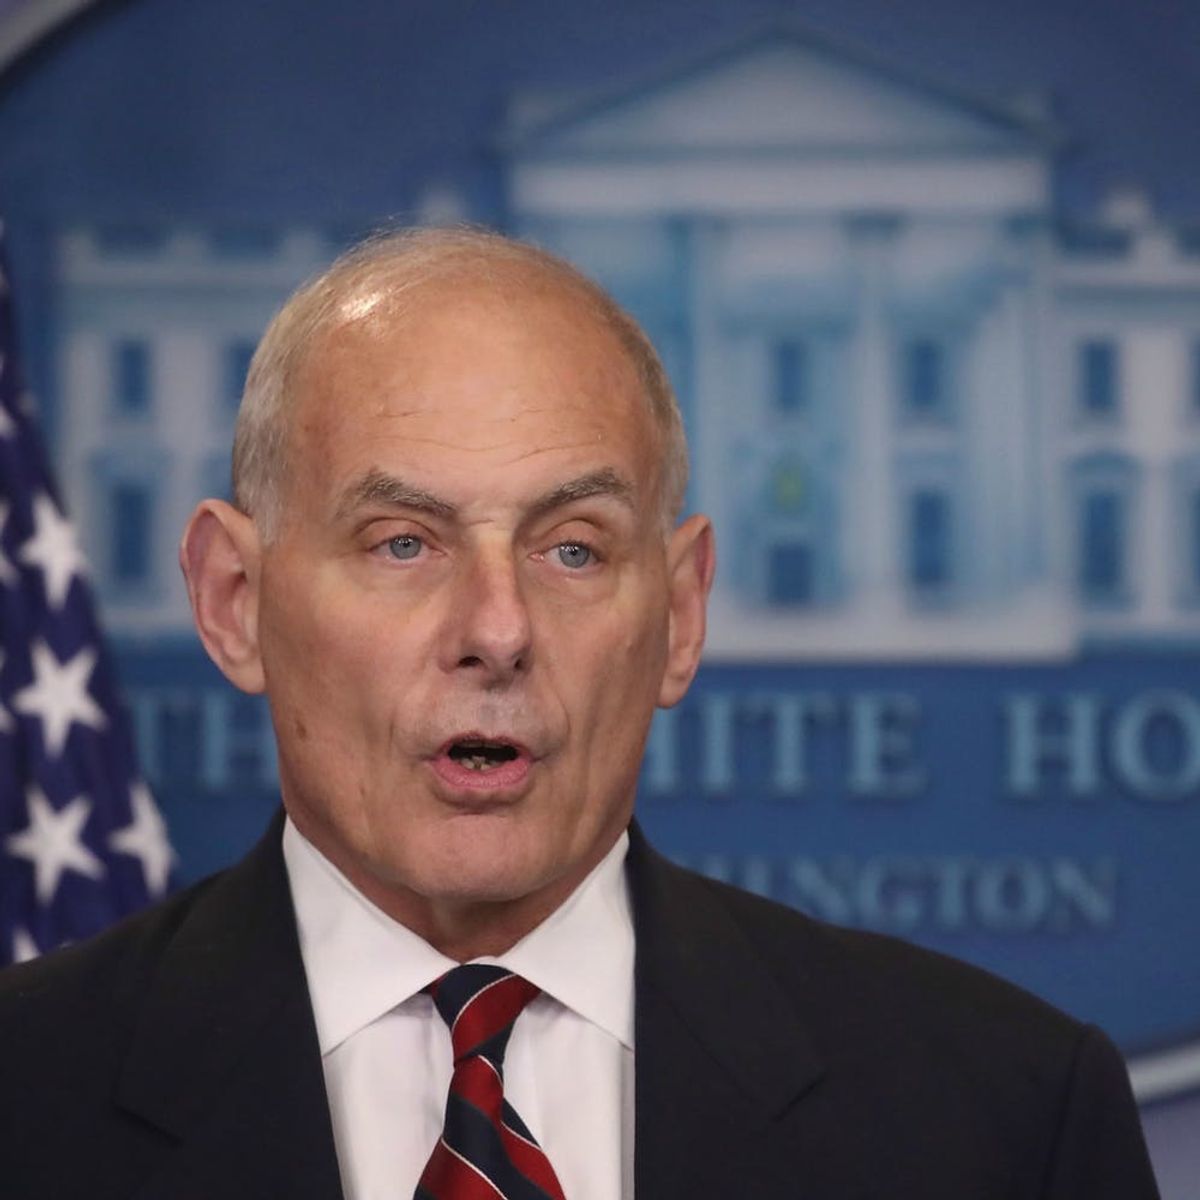 White House Chief of Staff John Kelly Used a Racist Stereotype to Describe DACA Recipients